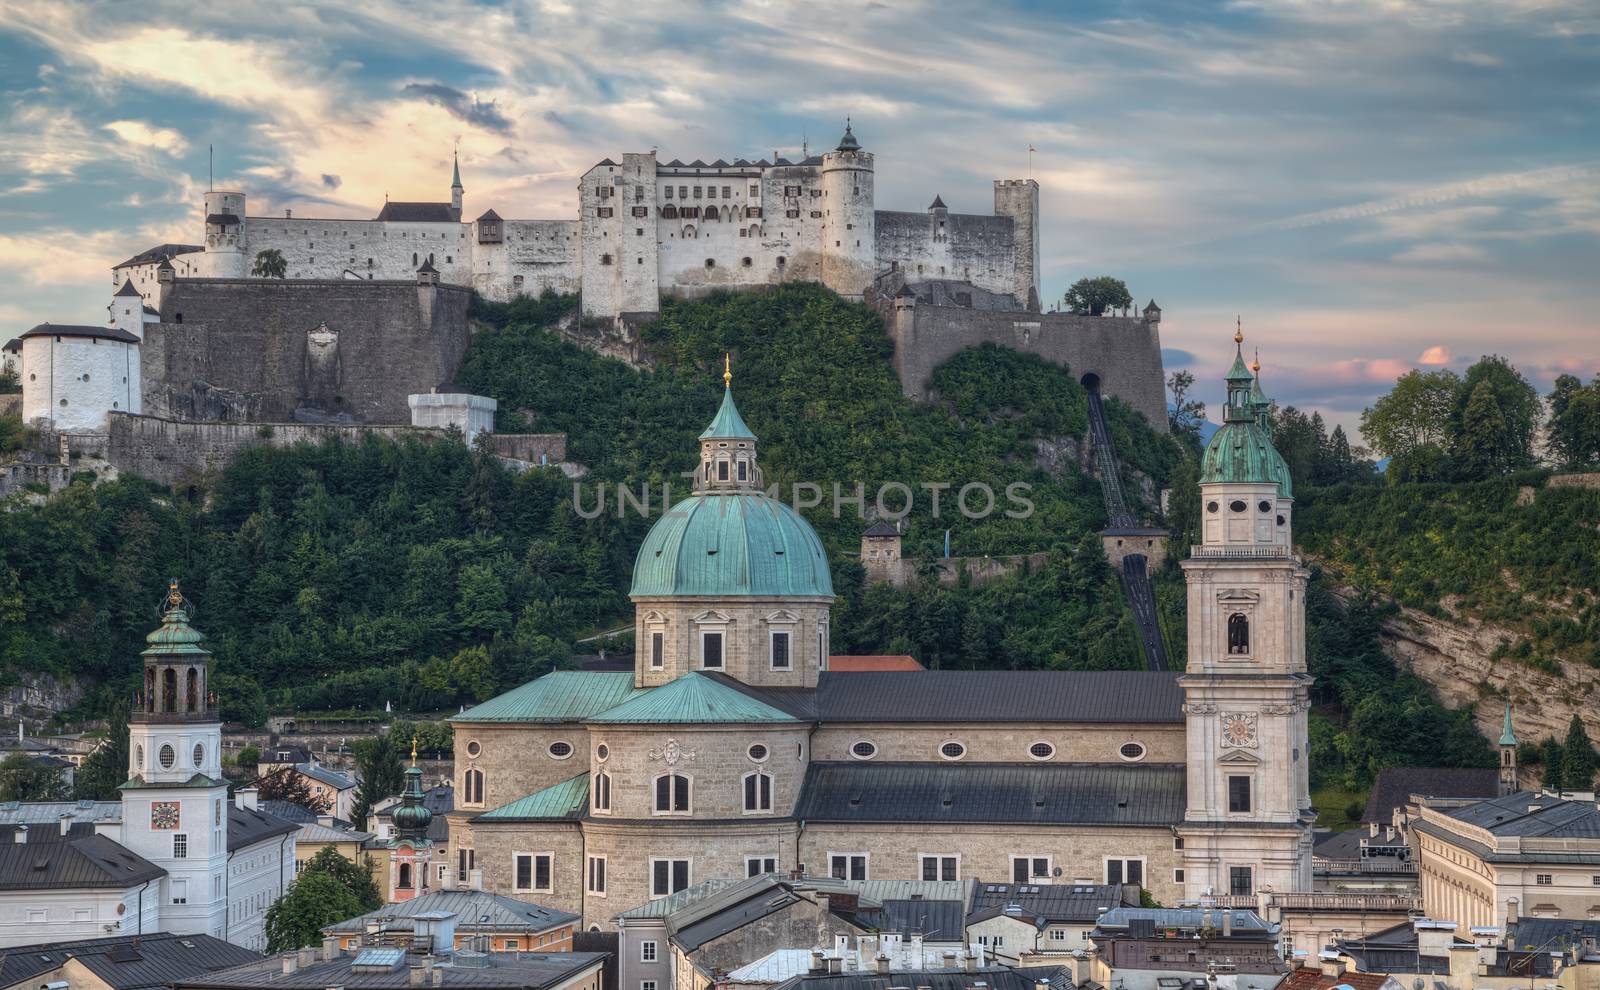 Old City and Castle Hohensalzburg in Morning by mot1963